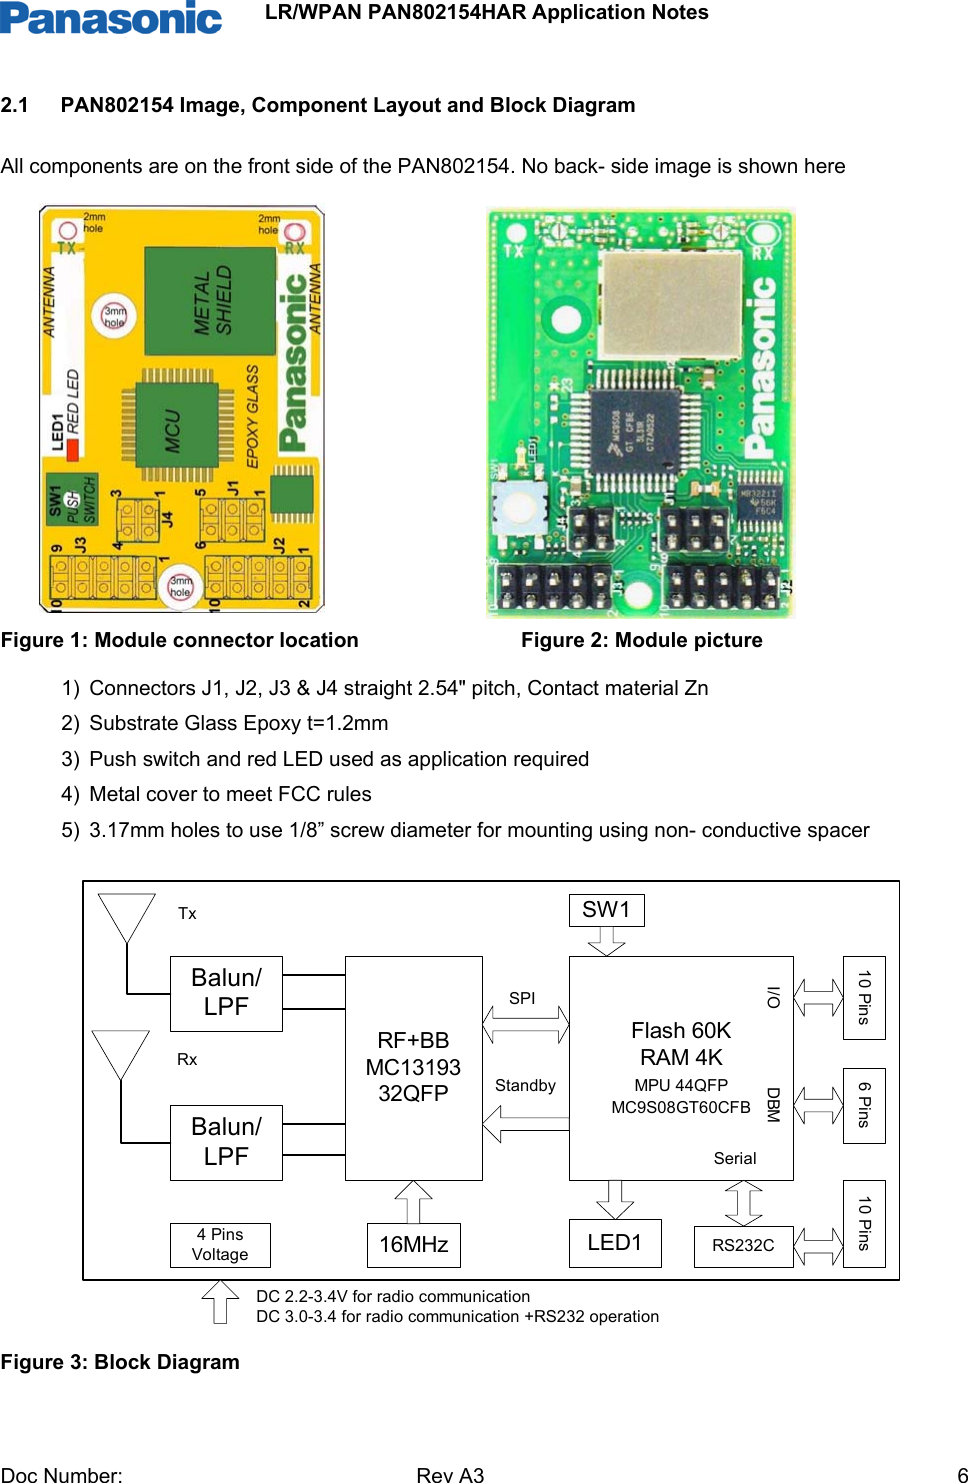                 LR/WPAN PAN802154HAR Application Notes Doc Number:   Rev A3    62.1  PAN802154 Image, Component Layout and Block Diagram  All components are on the front side of the PAN802154. No back- side image is shown here                                                        Figure 1: Module connector location                            Figure 2: Module picture 1)  Connectors J1, J2, J3 &amp; J4 straight 2.54&quot; pitch, Contact material Zn 2)  Substrate Glass Epoxy t=1.2mm 3)  Push switch and red LED used as application required  4)  Metal cover to meet FCC rules 5)  3.17mm holes to use 1/8” screw diameter for mounting using non- conductive spacer               Figure 3: Block Diagram Balun/LPFRF+BBMC1319332QFPBalun/LPFFlash 60KRAM 4KMPU 44QFPMC9S08GT60CFBSPIStandby16MHz LED1SW1RS232C10 Pins 6 Pins 10 Pins4 PinsVoltageI/O DBMSerialTxRxDC 2.2-3.4V for radio communicationDC 3.0-3.4 for radio communication +RS232 operation